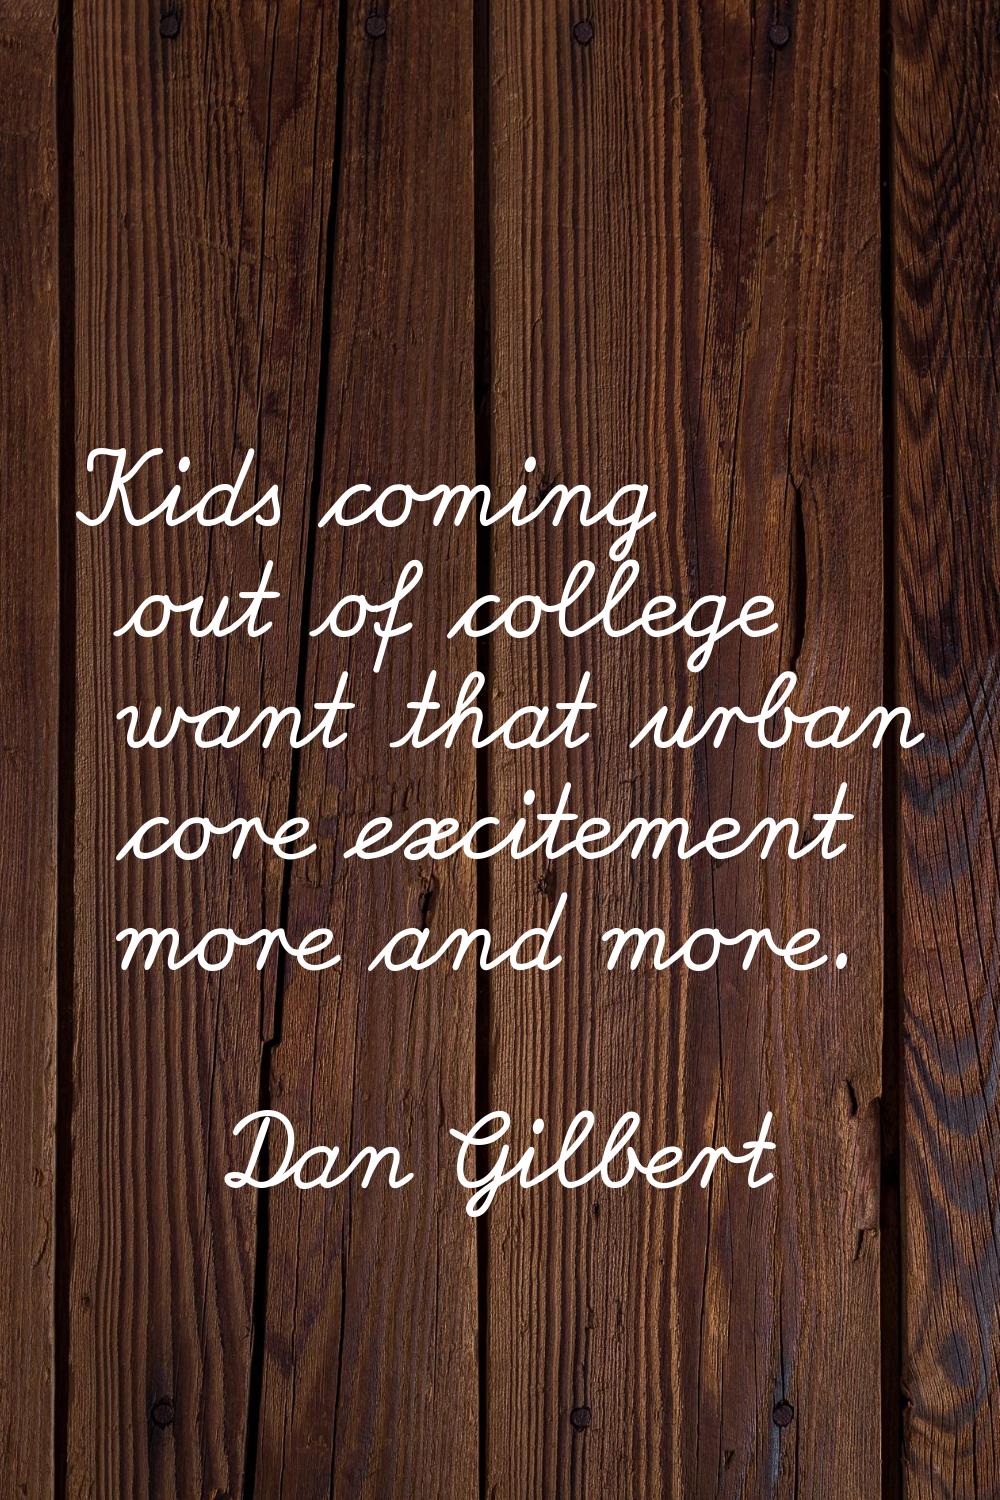 Kids coming out of college want that urban core excitement more and more.